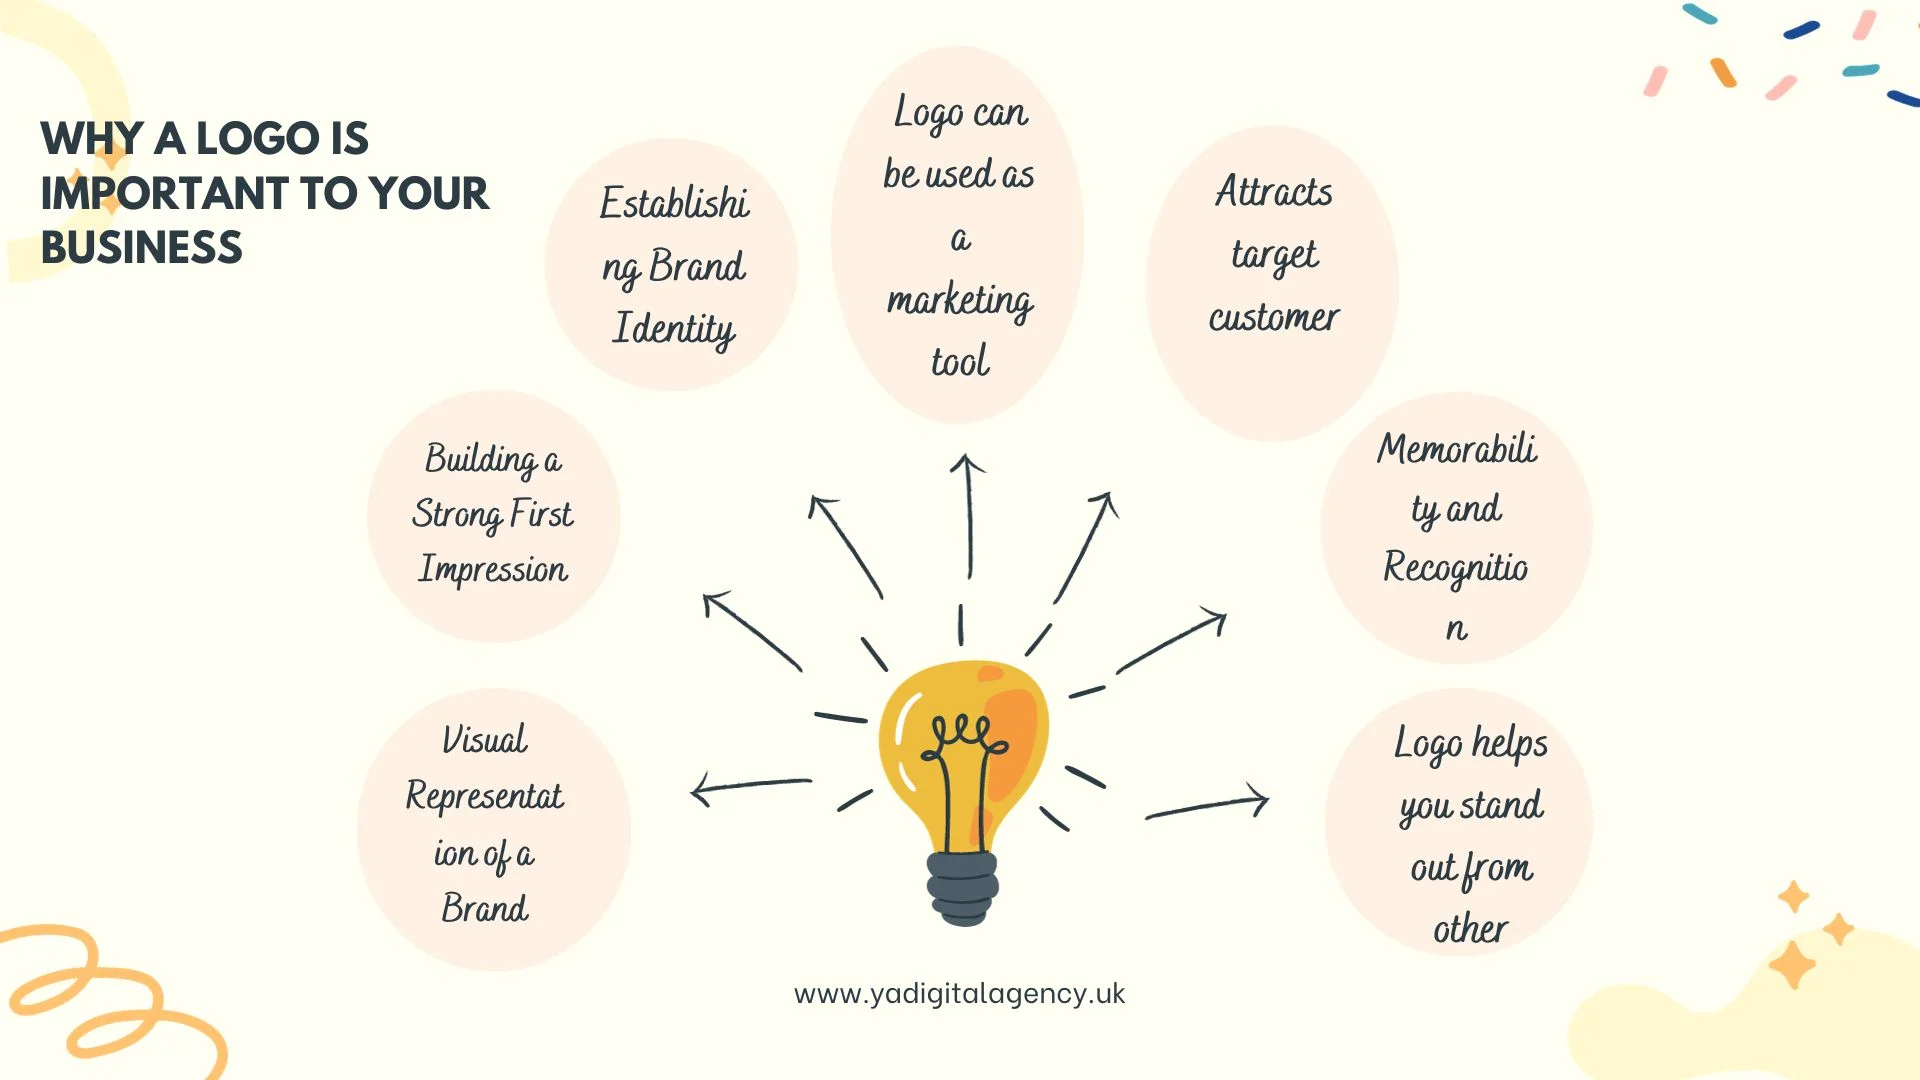 7 reasons why a logo is important to your business